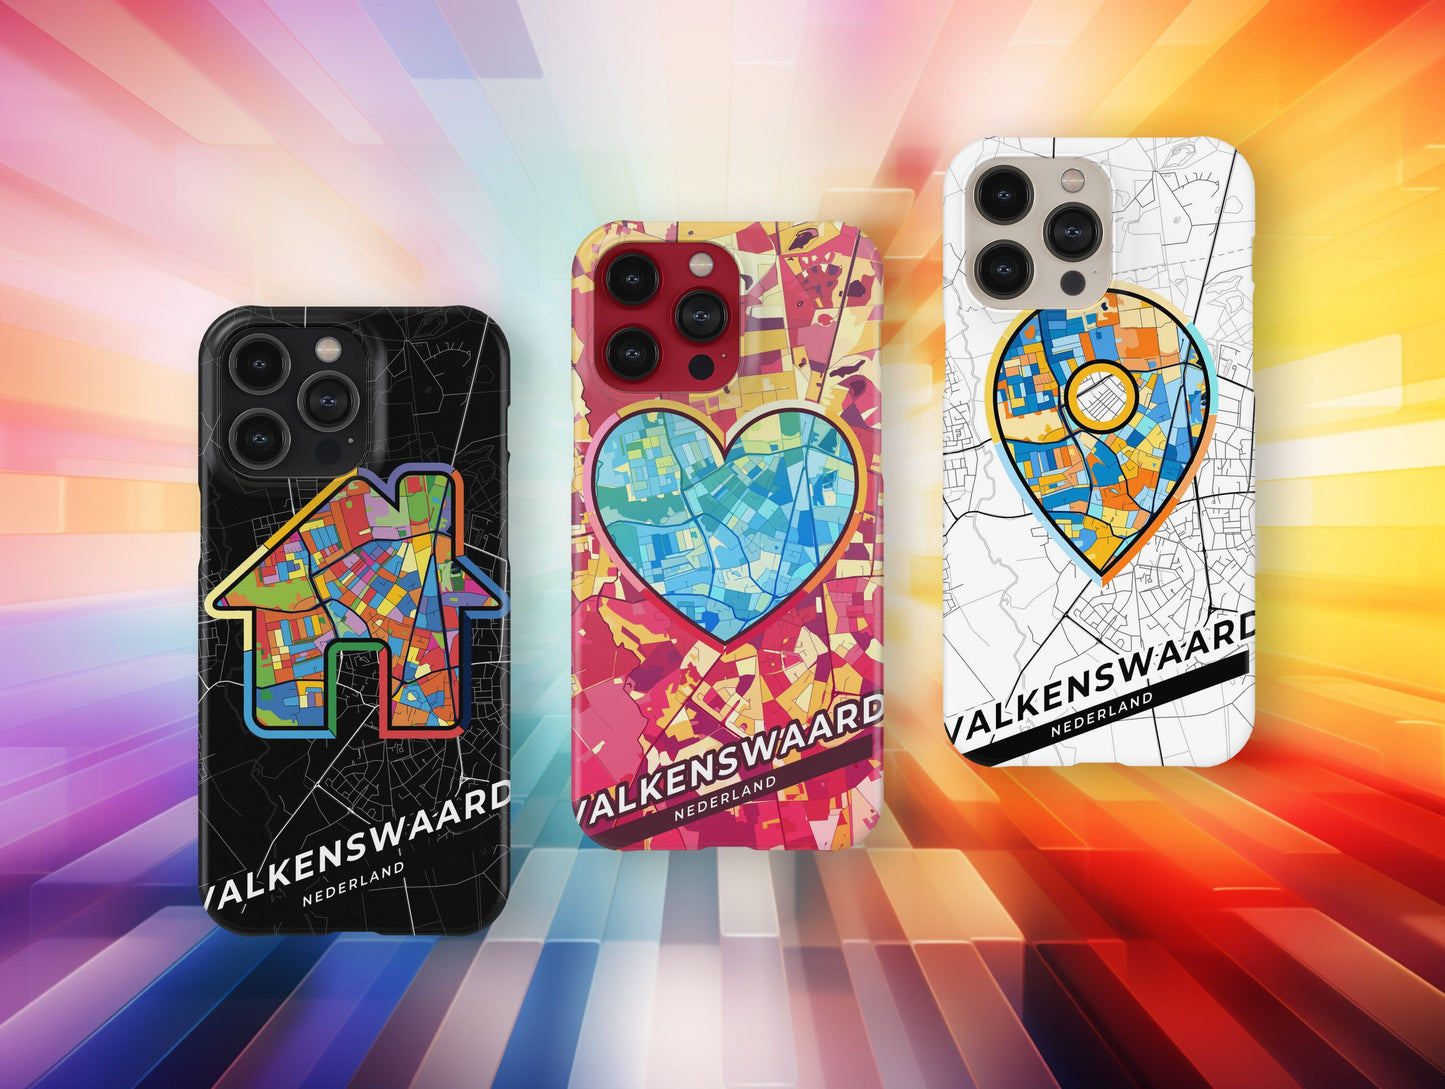 Valkenswaard Netherlands slim phone case with colorful icon